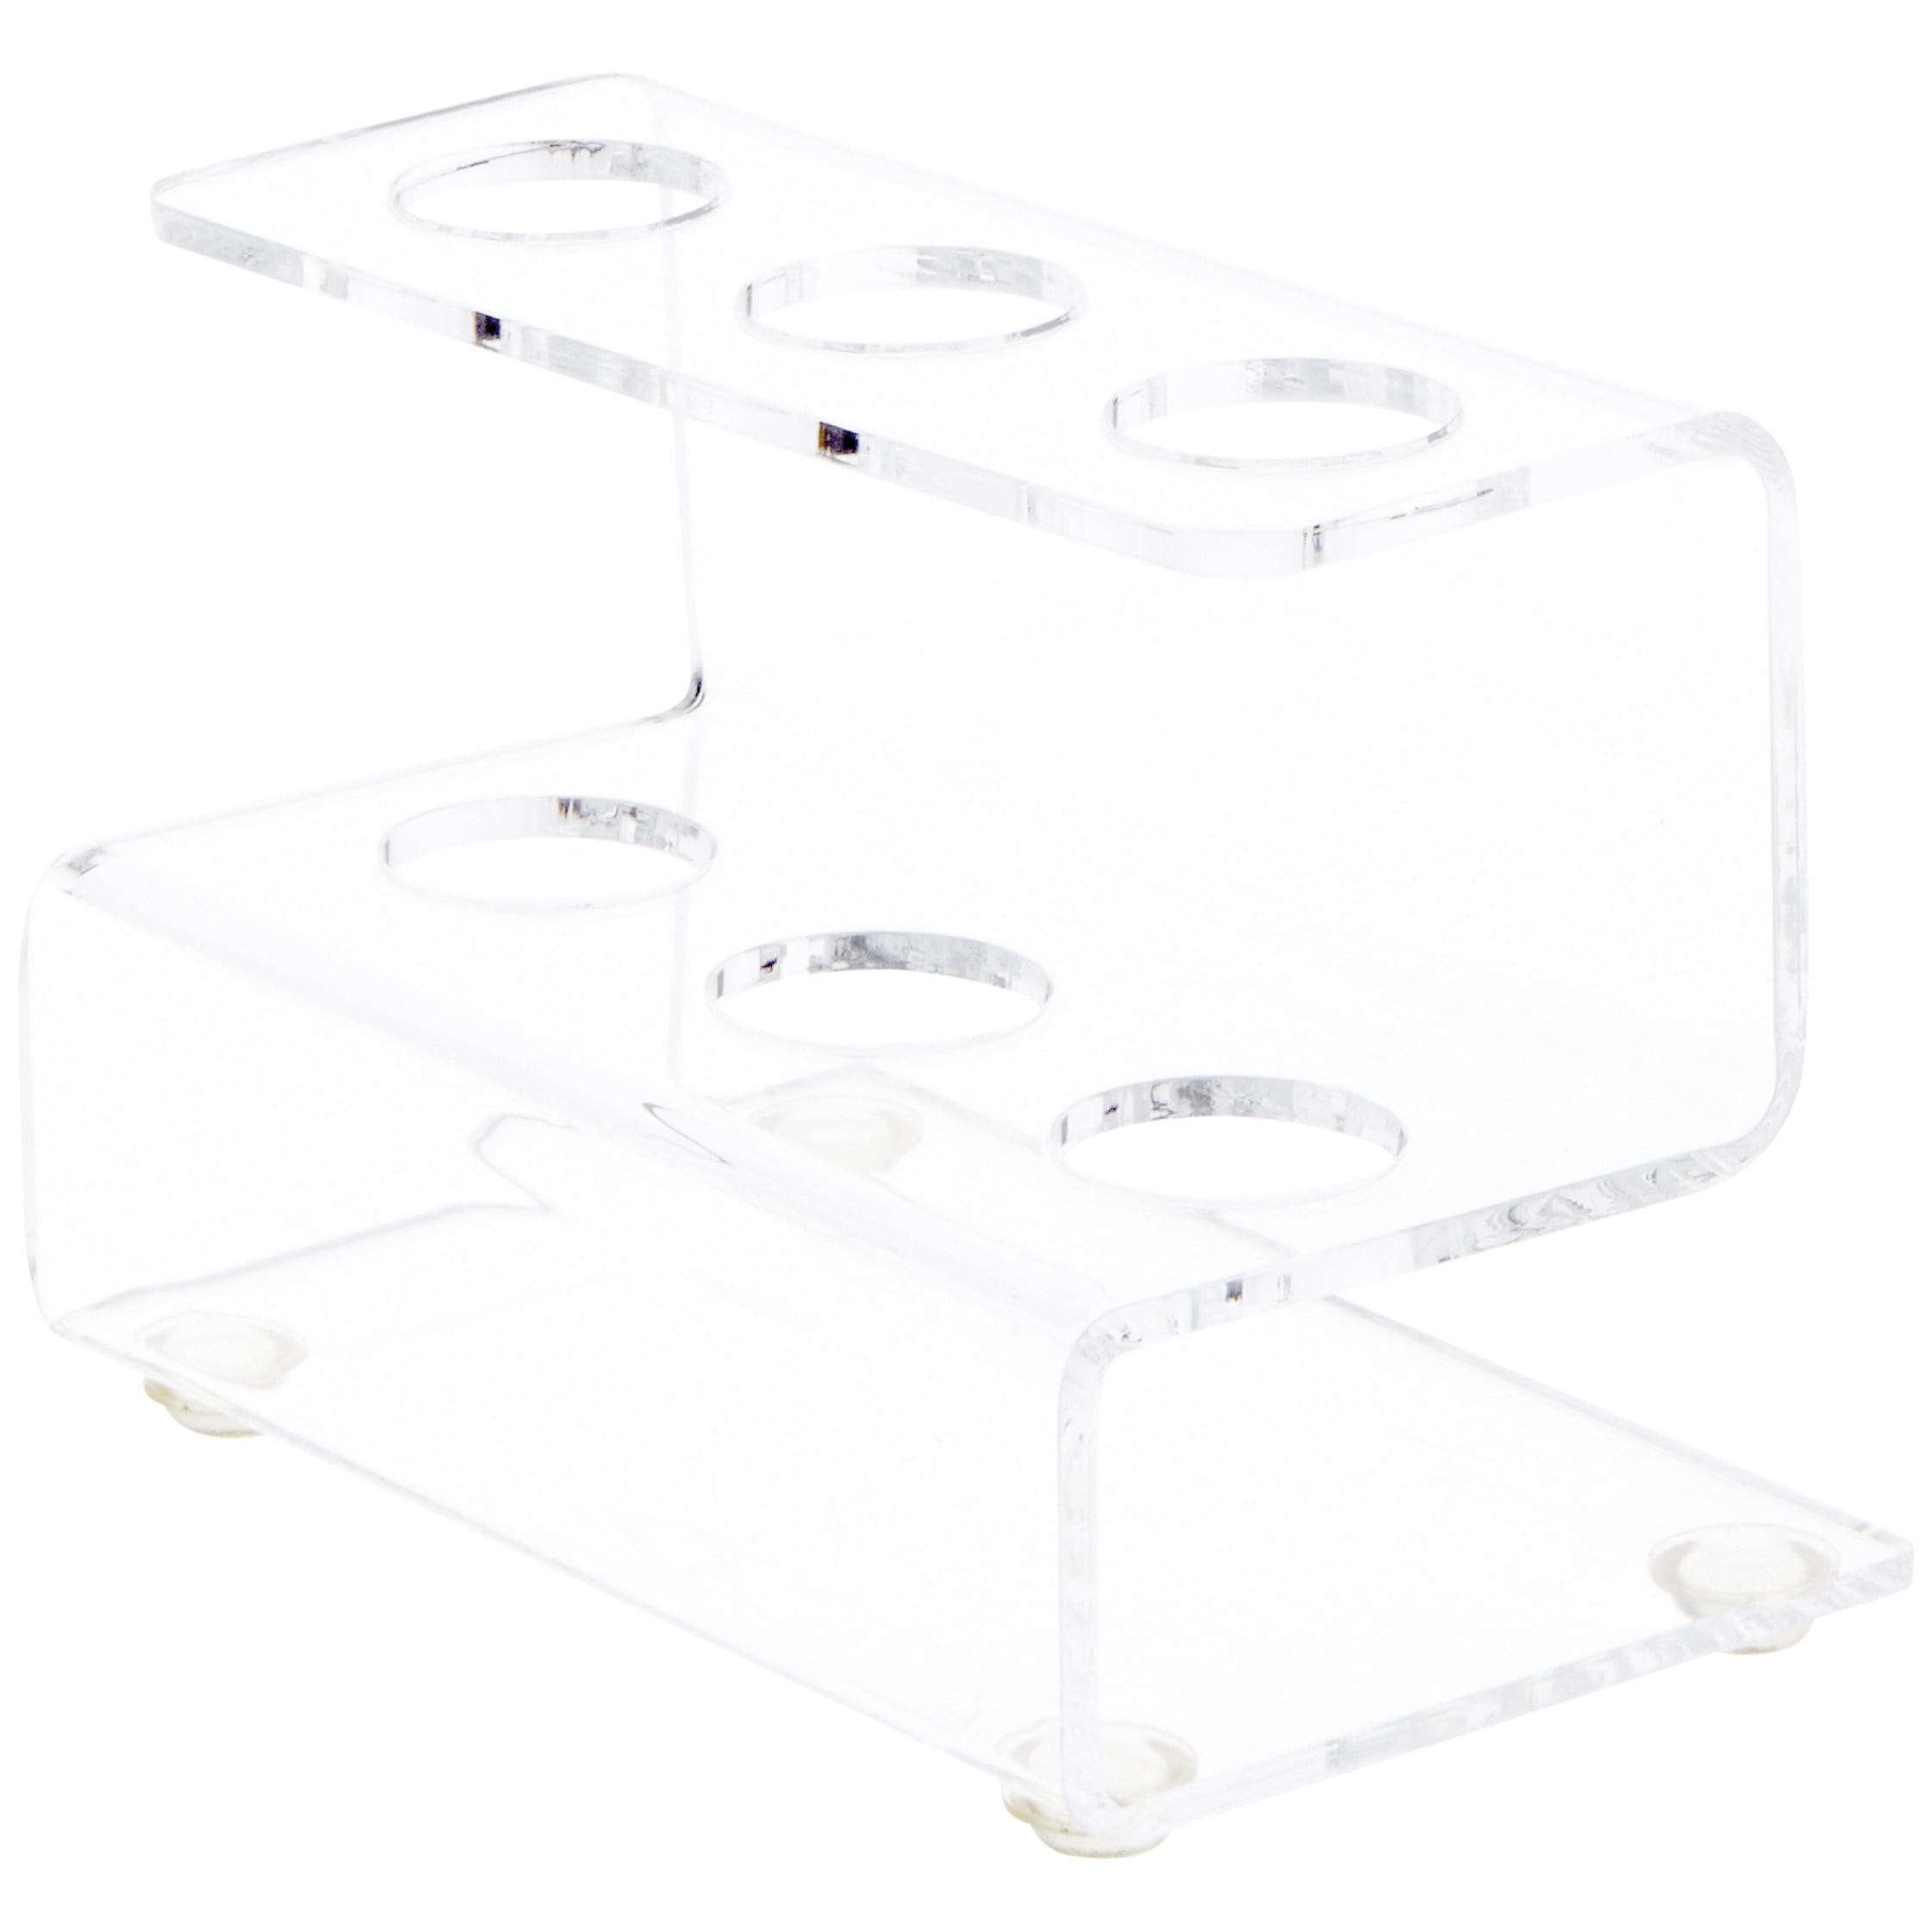 Details about   Acrylic Clear Stand Model Removable Display Shelf Transparent Perspex Stands 